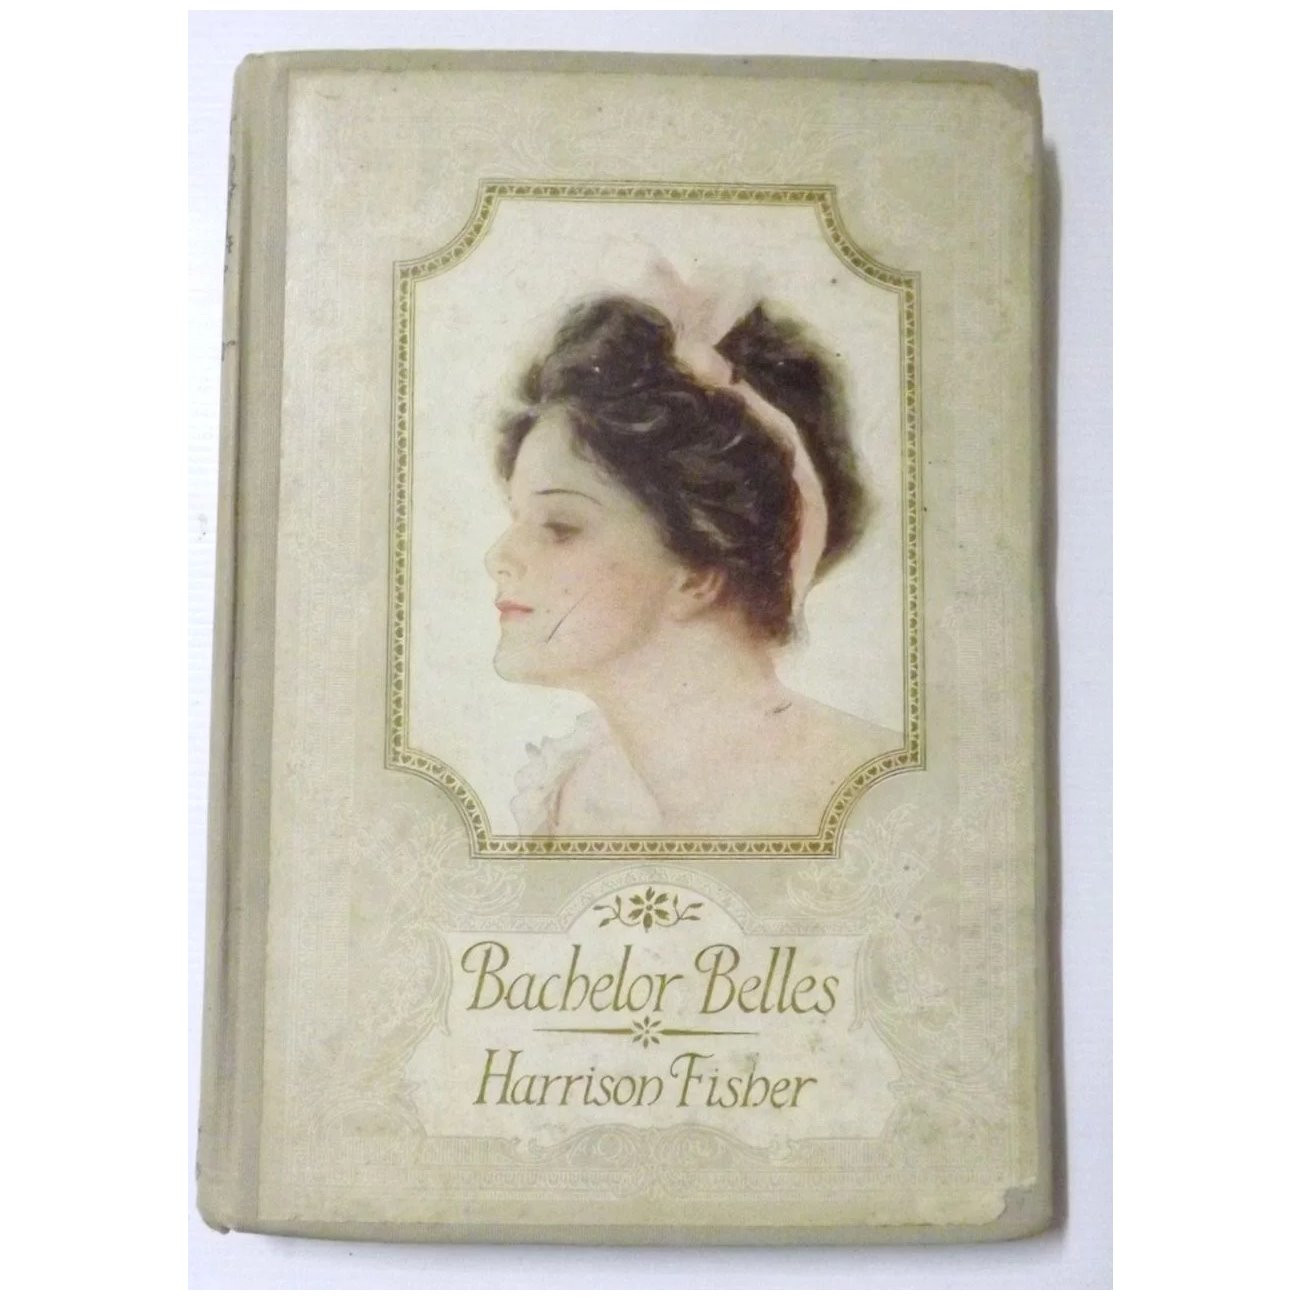 Bachelor Belles By Harrison Fisher -First Edition 1908